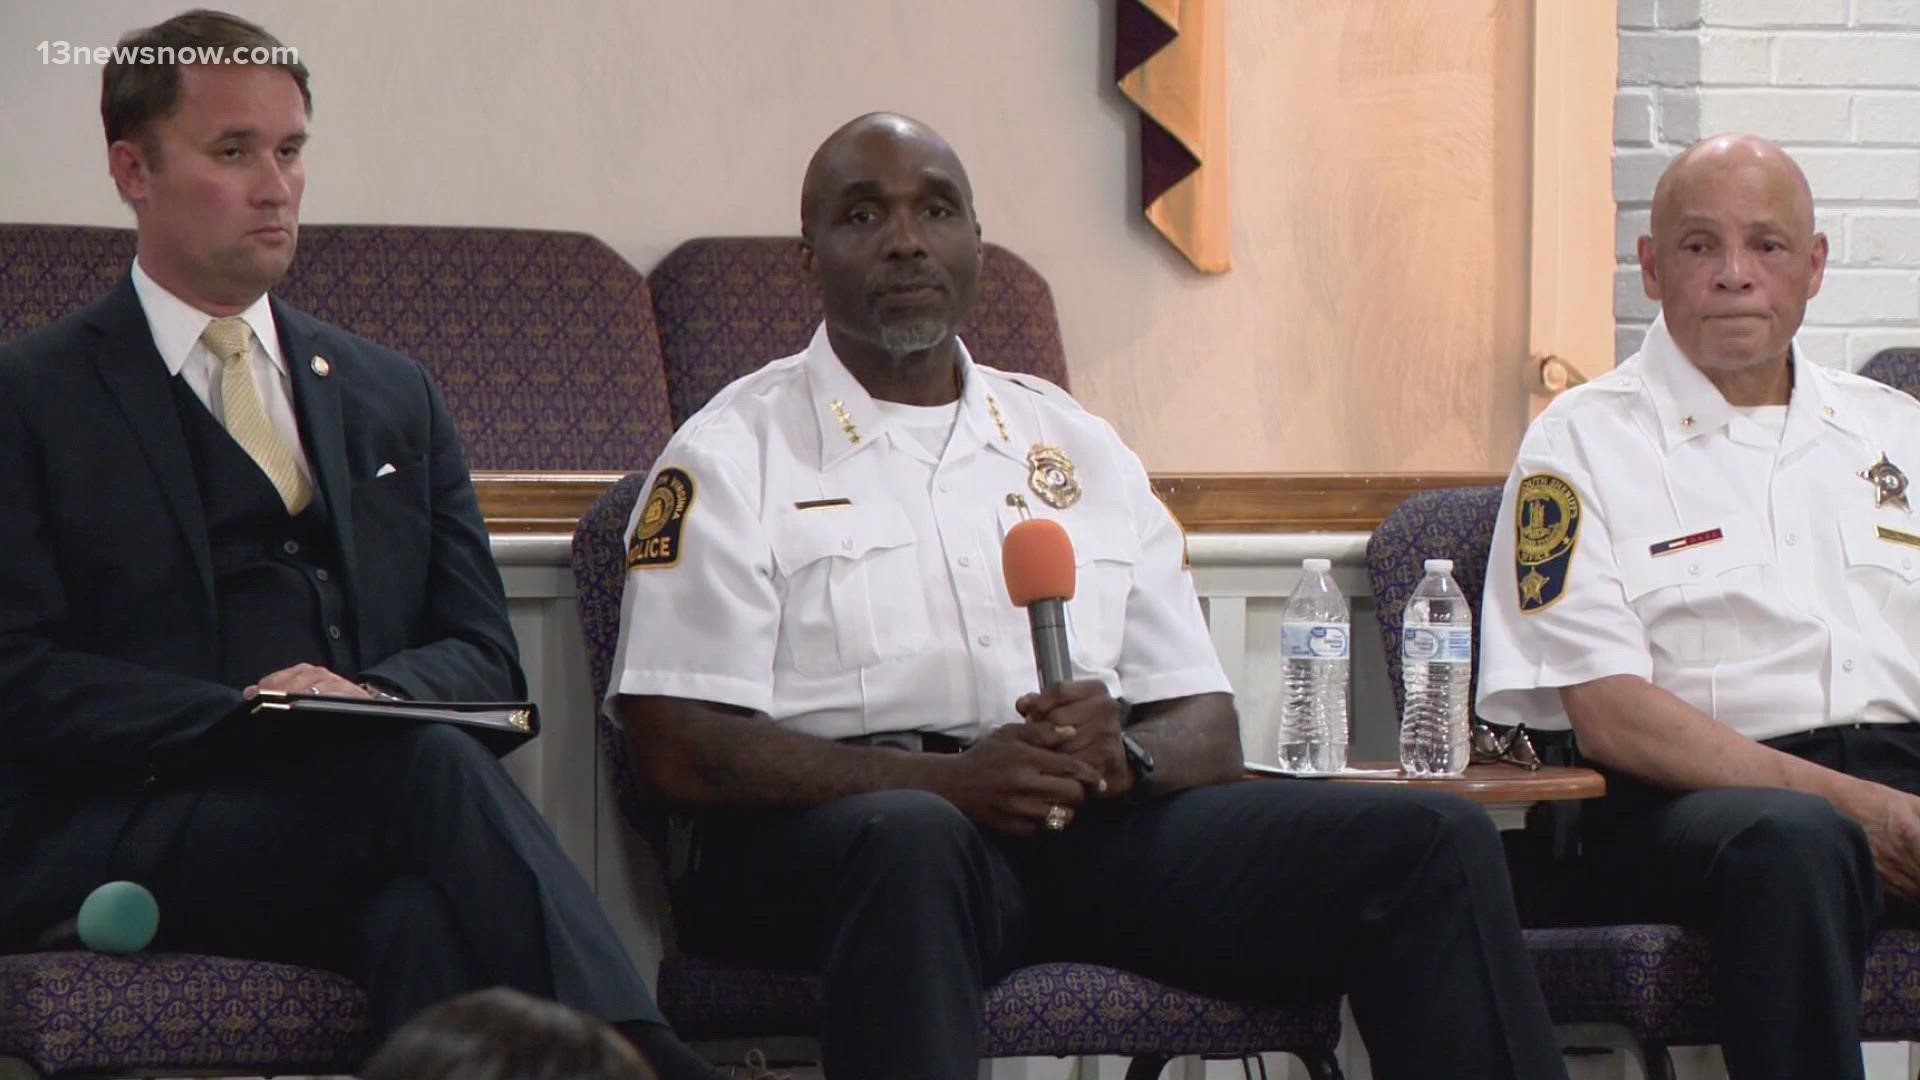 The attorney general, police chief and sheriff said community policing, officer retention and a whole-hearted effort from the community play major roles.